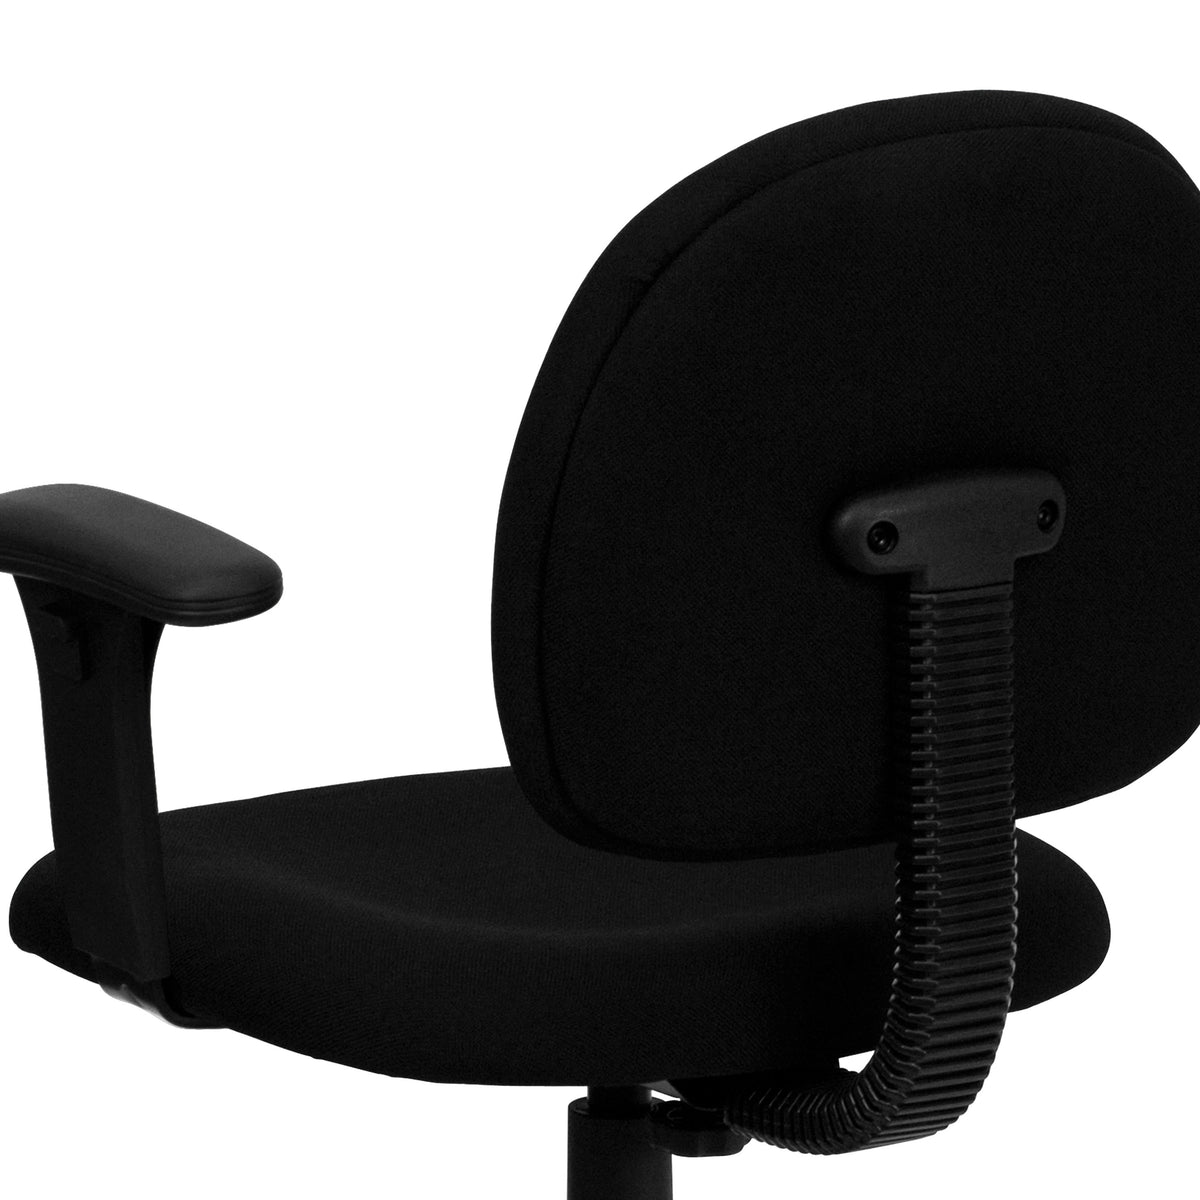 Black |#| Mid-Back Black Fabric Swivel Task Office Chair with Adjustable Height and Arms